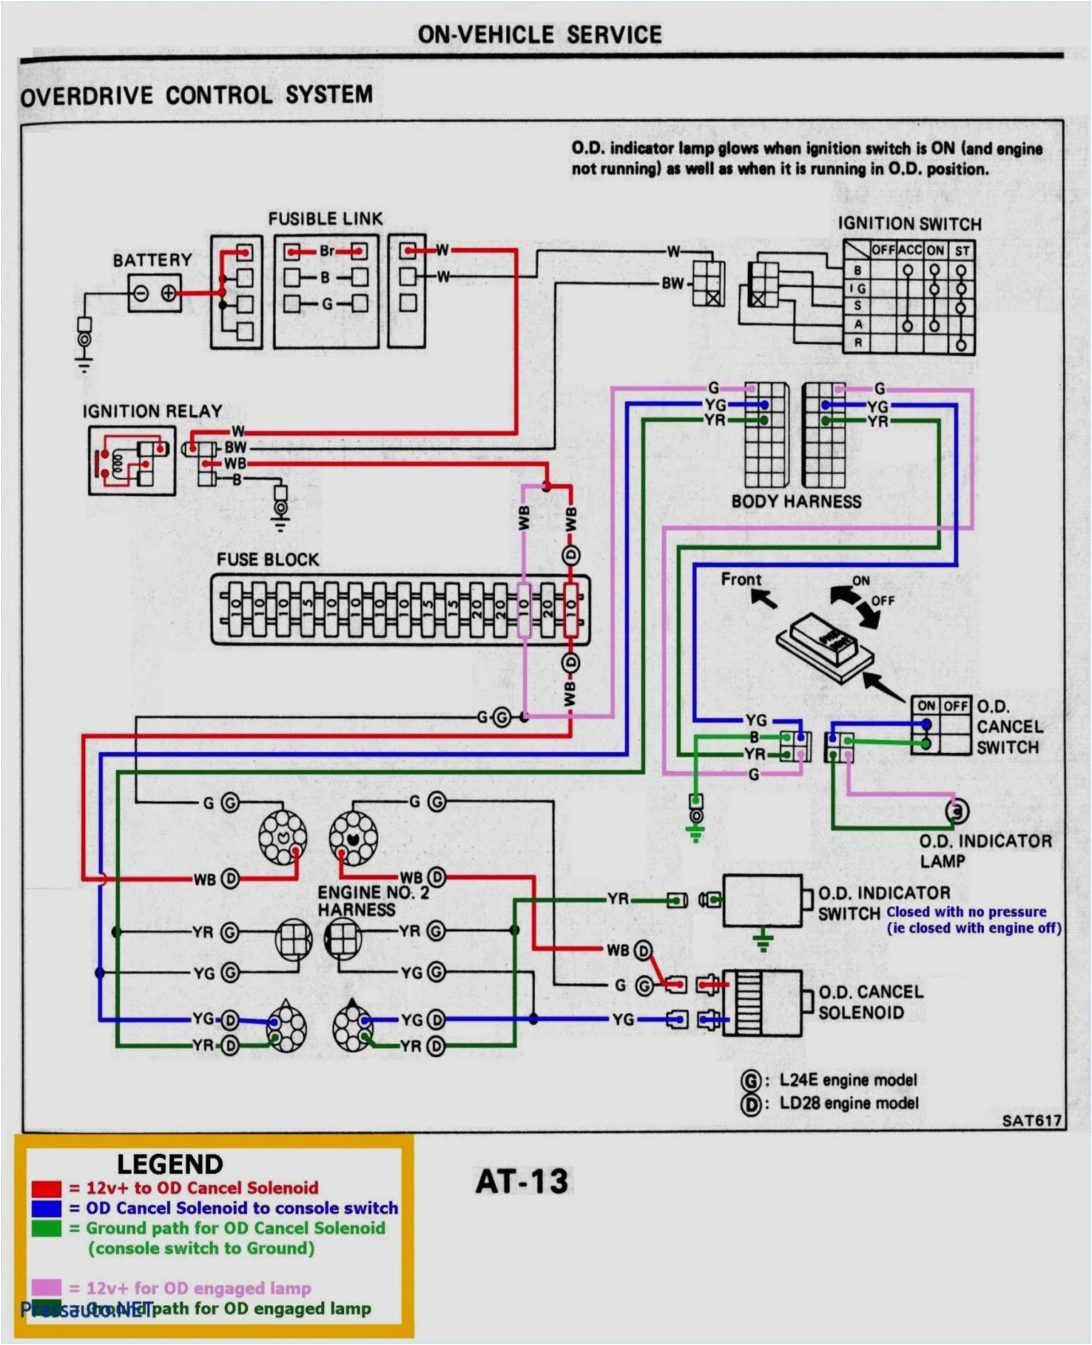 hilux wiring diagram wiring diagram basic wiring diagram sony car stereo along with ignition switch wiring